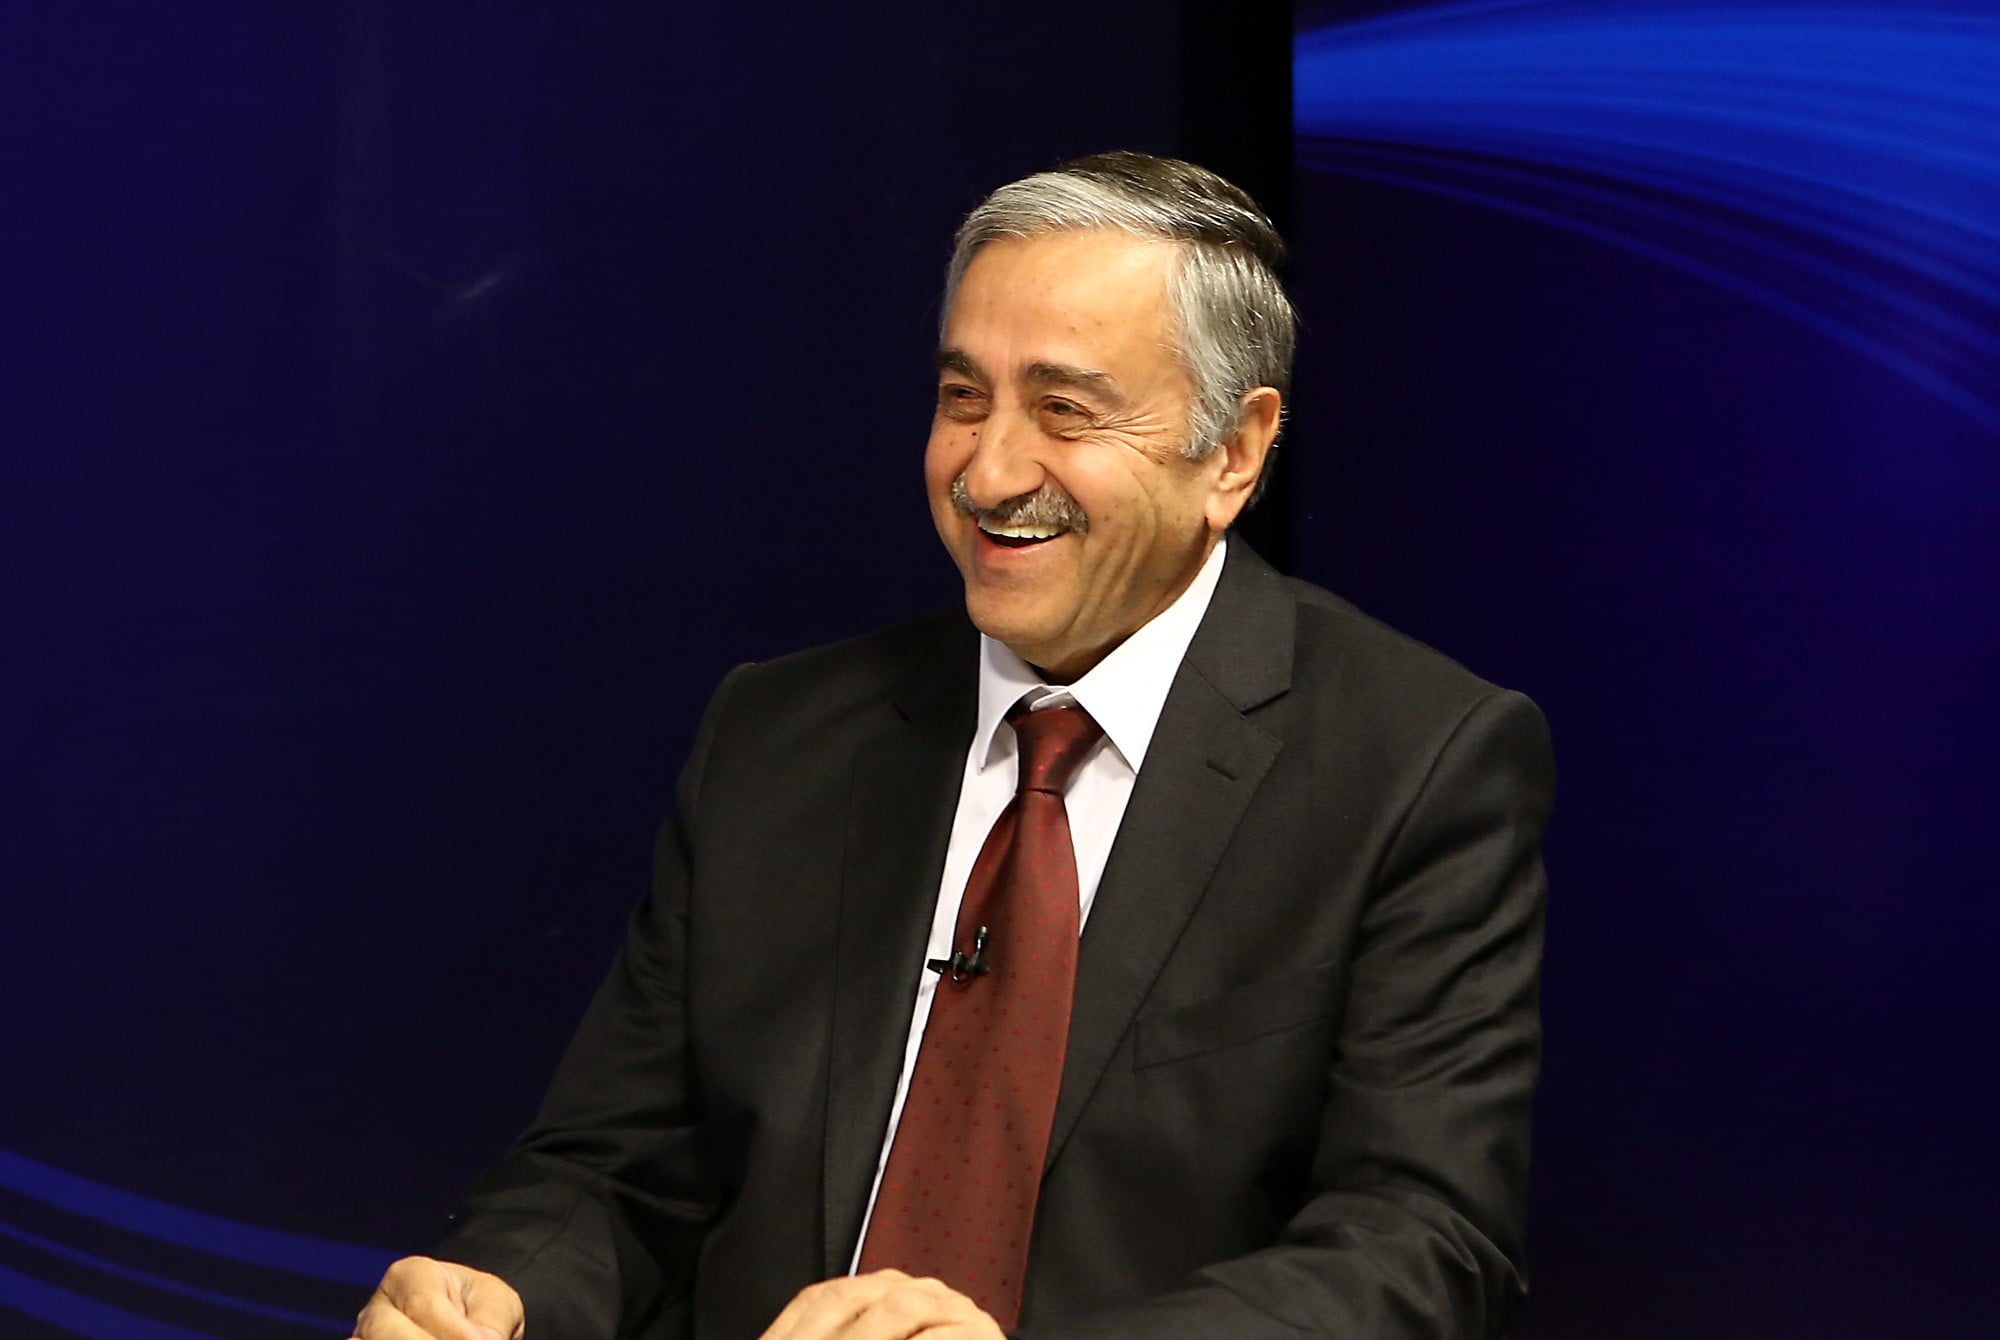 Mustafa Akinci is elected on 26 April 2015 as the fourth President of the TRNC